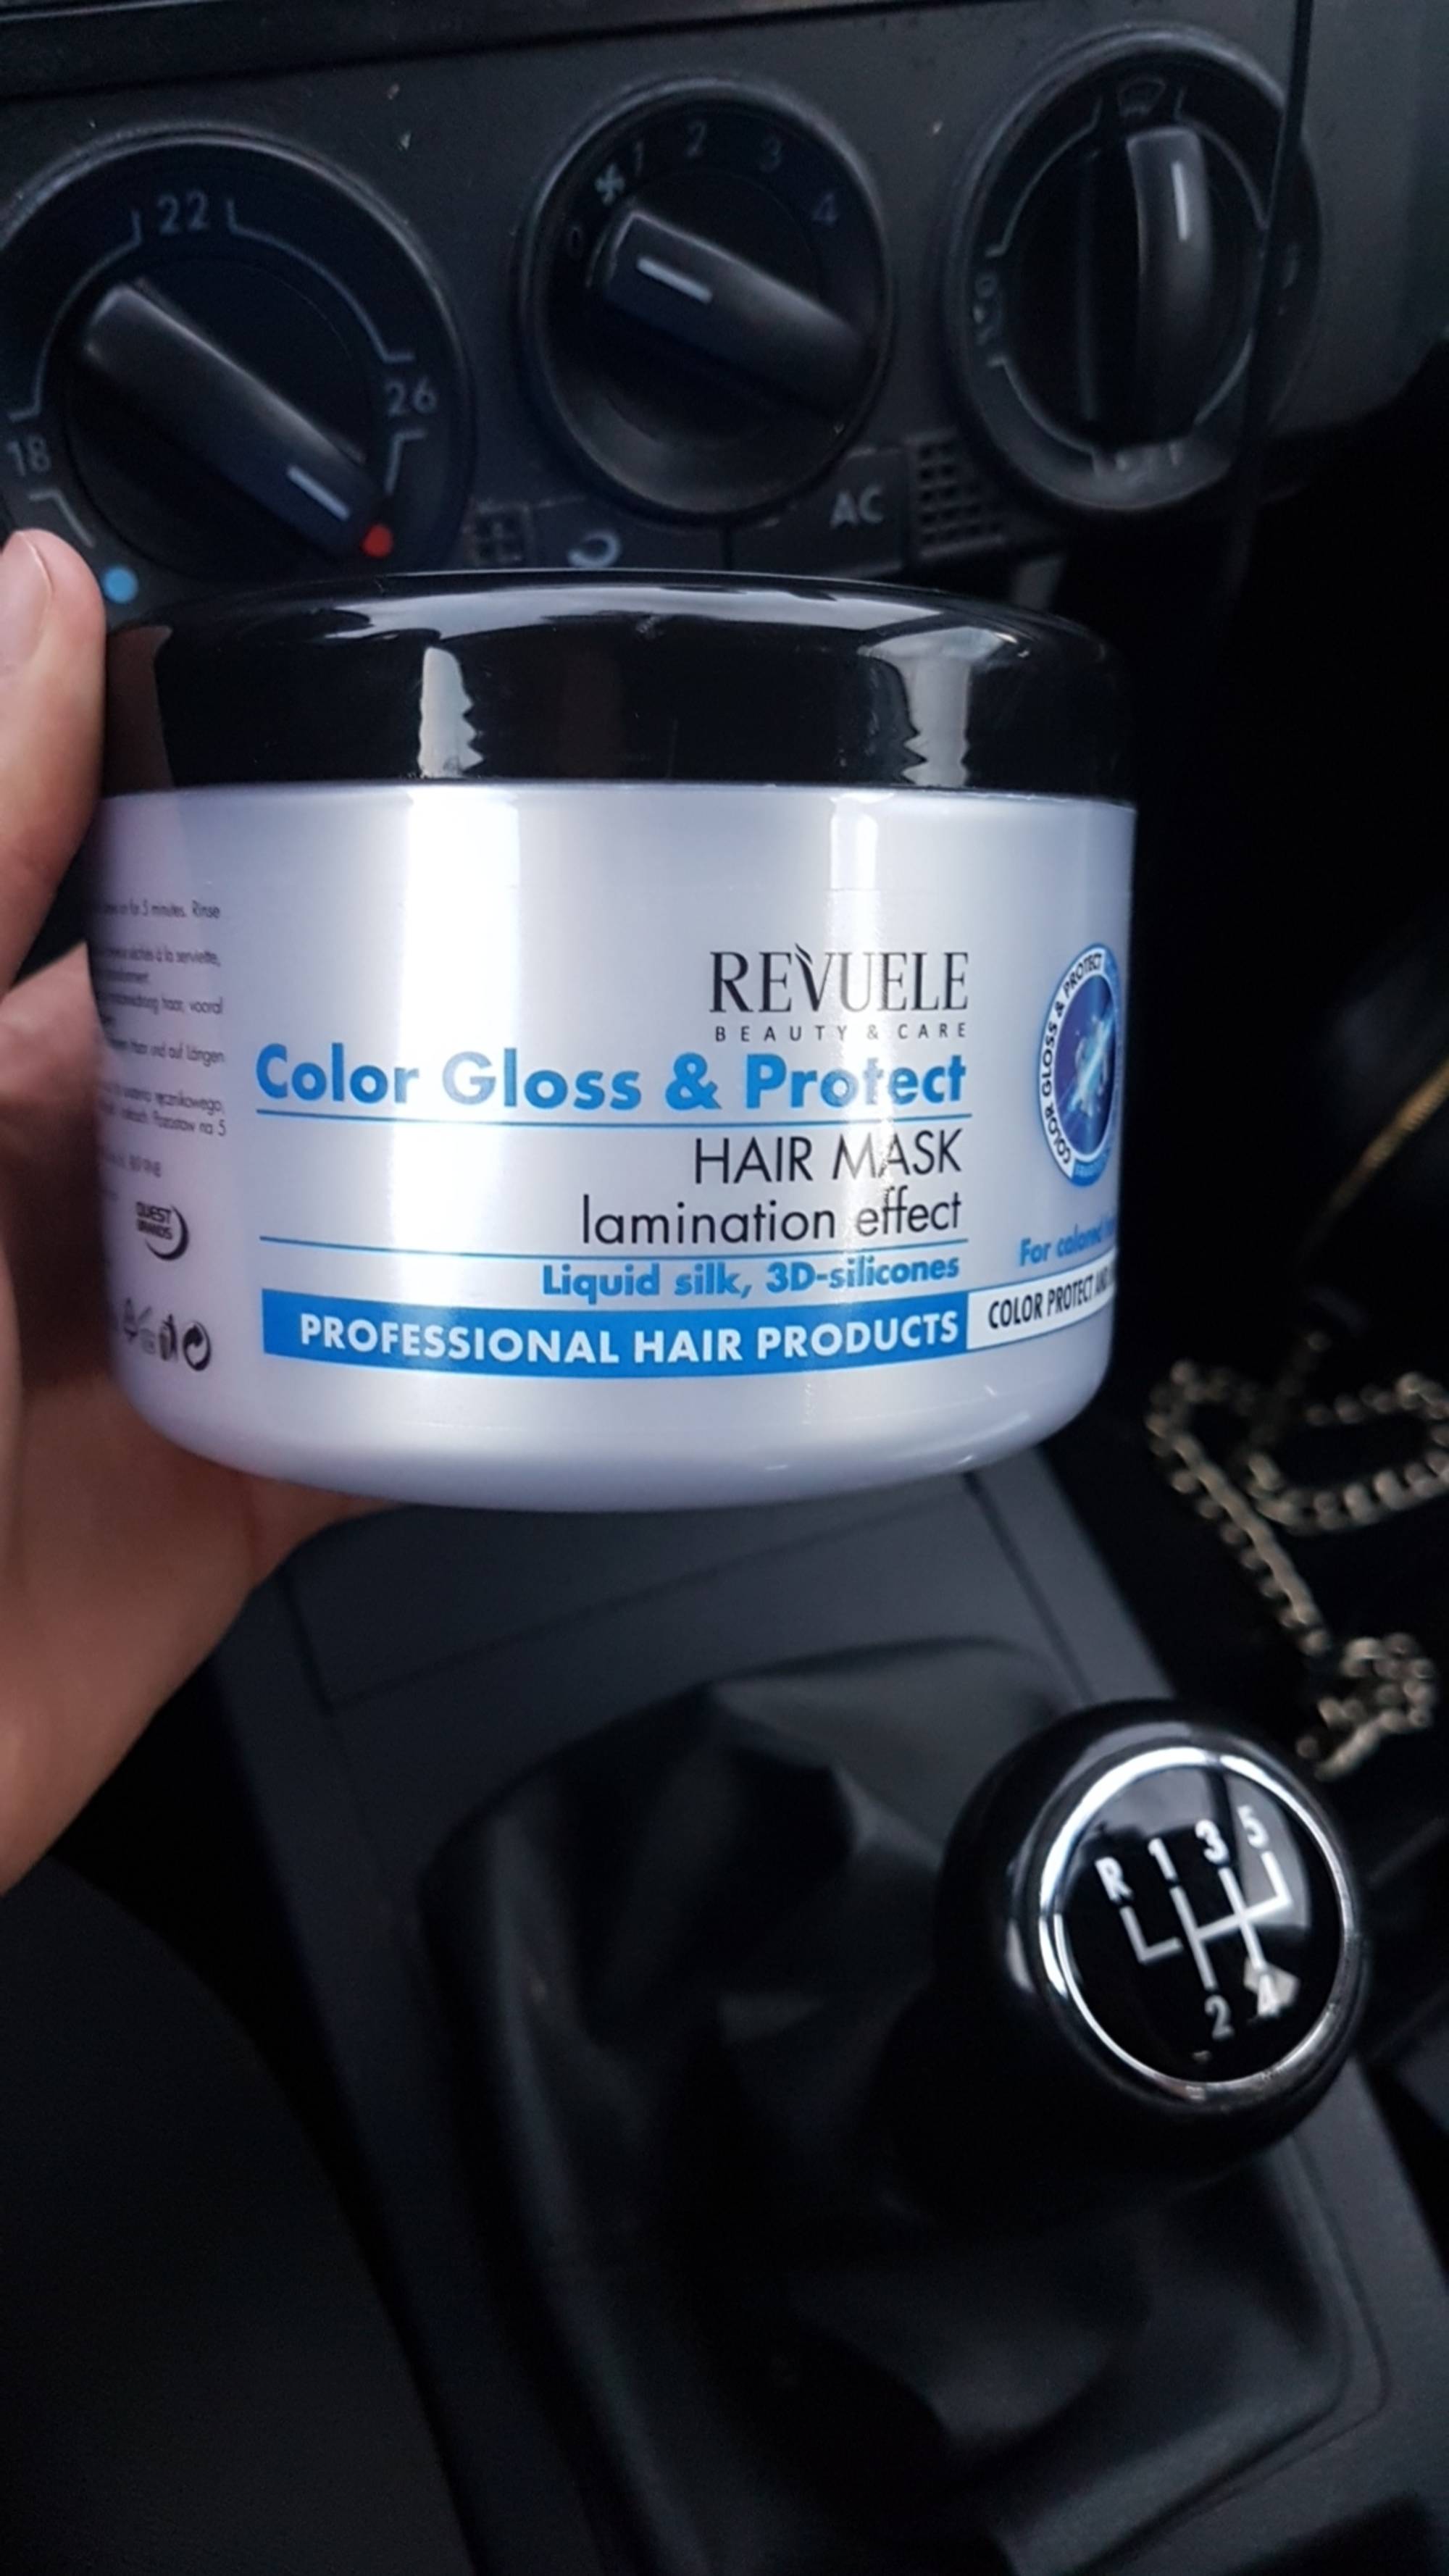 REVUELE - Color gloss & Protect - Hair mask 